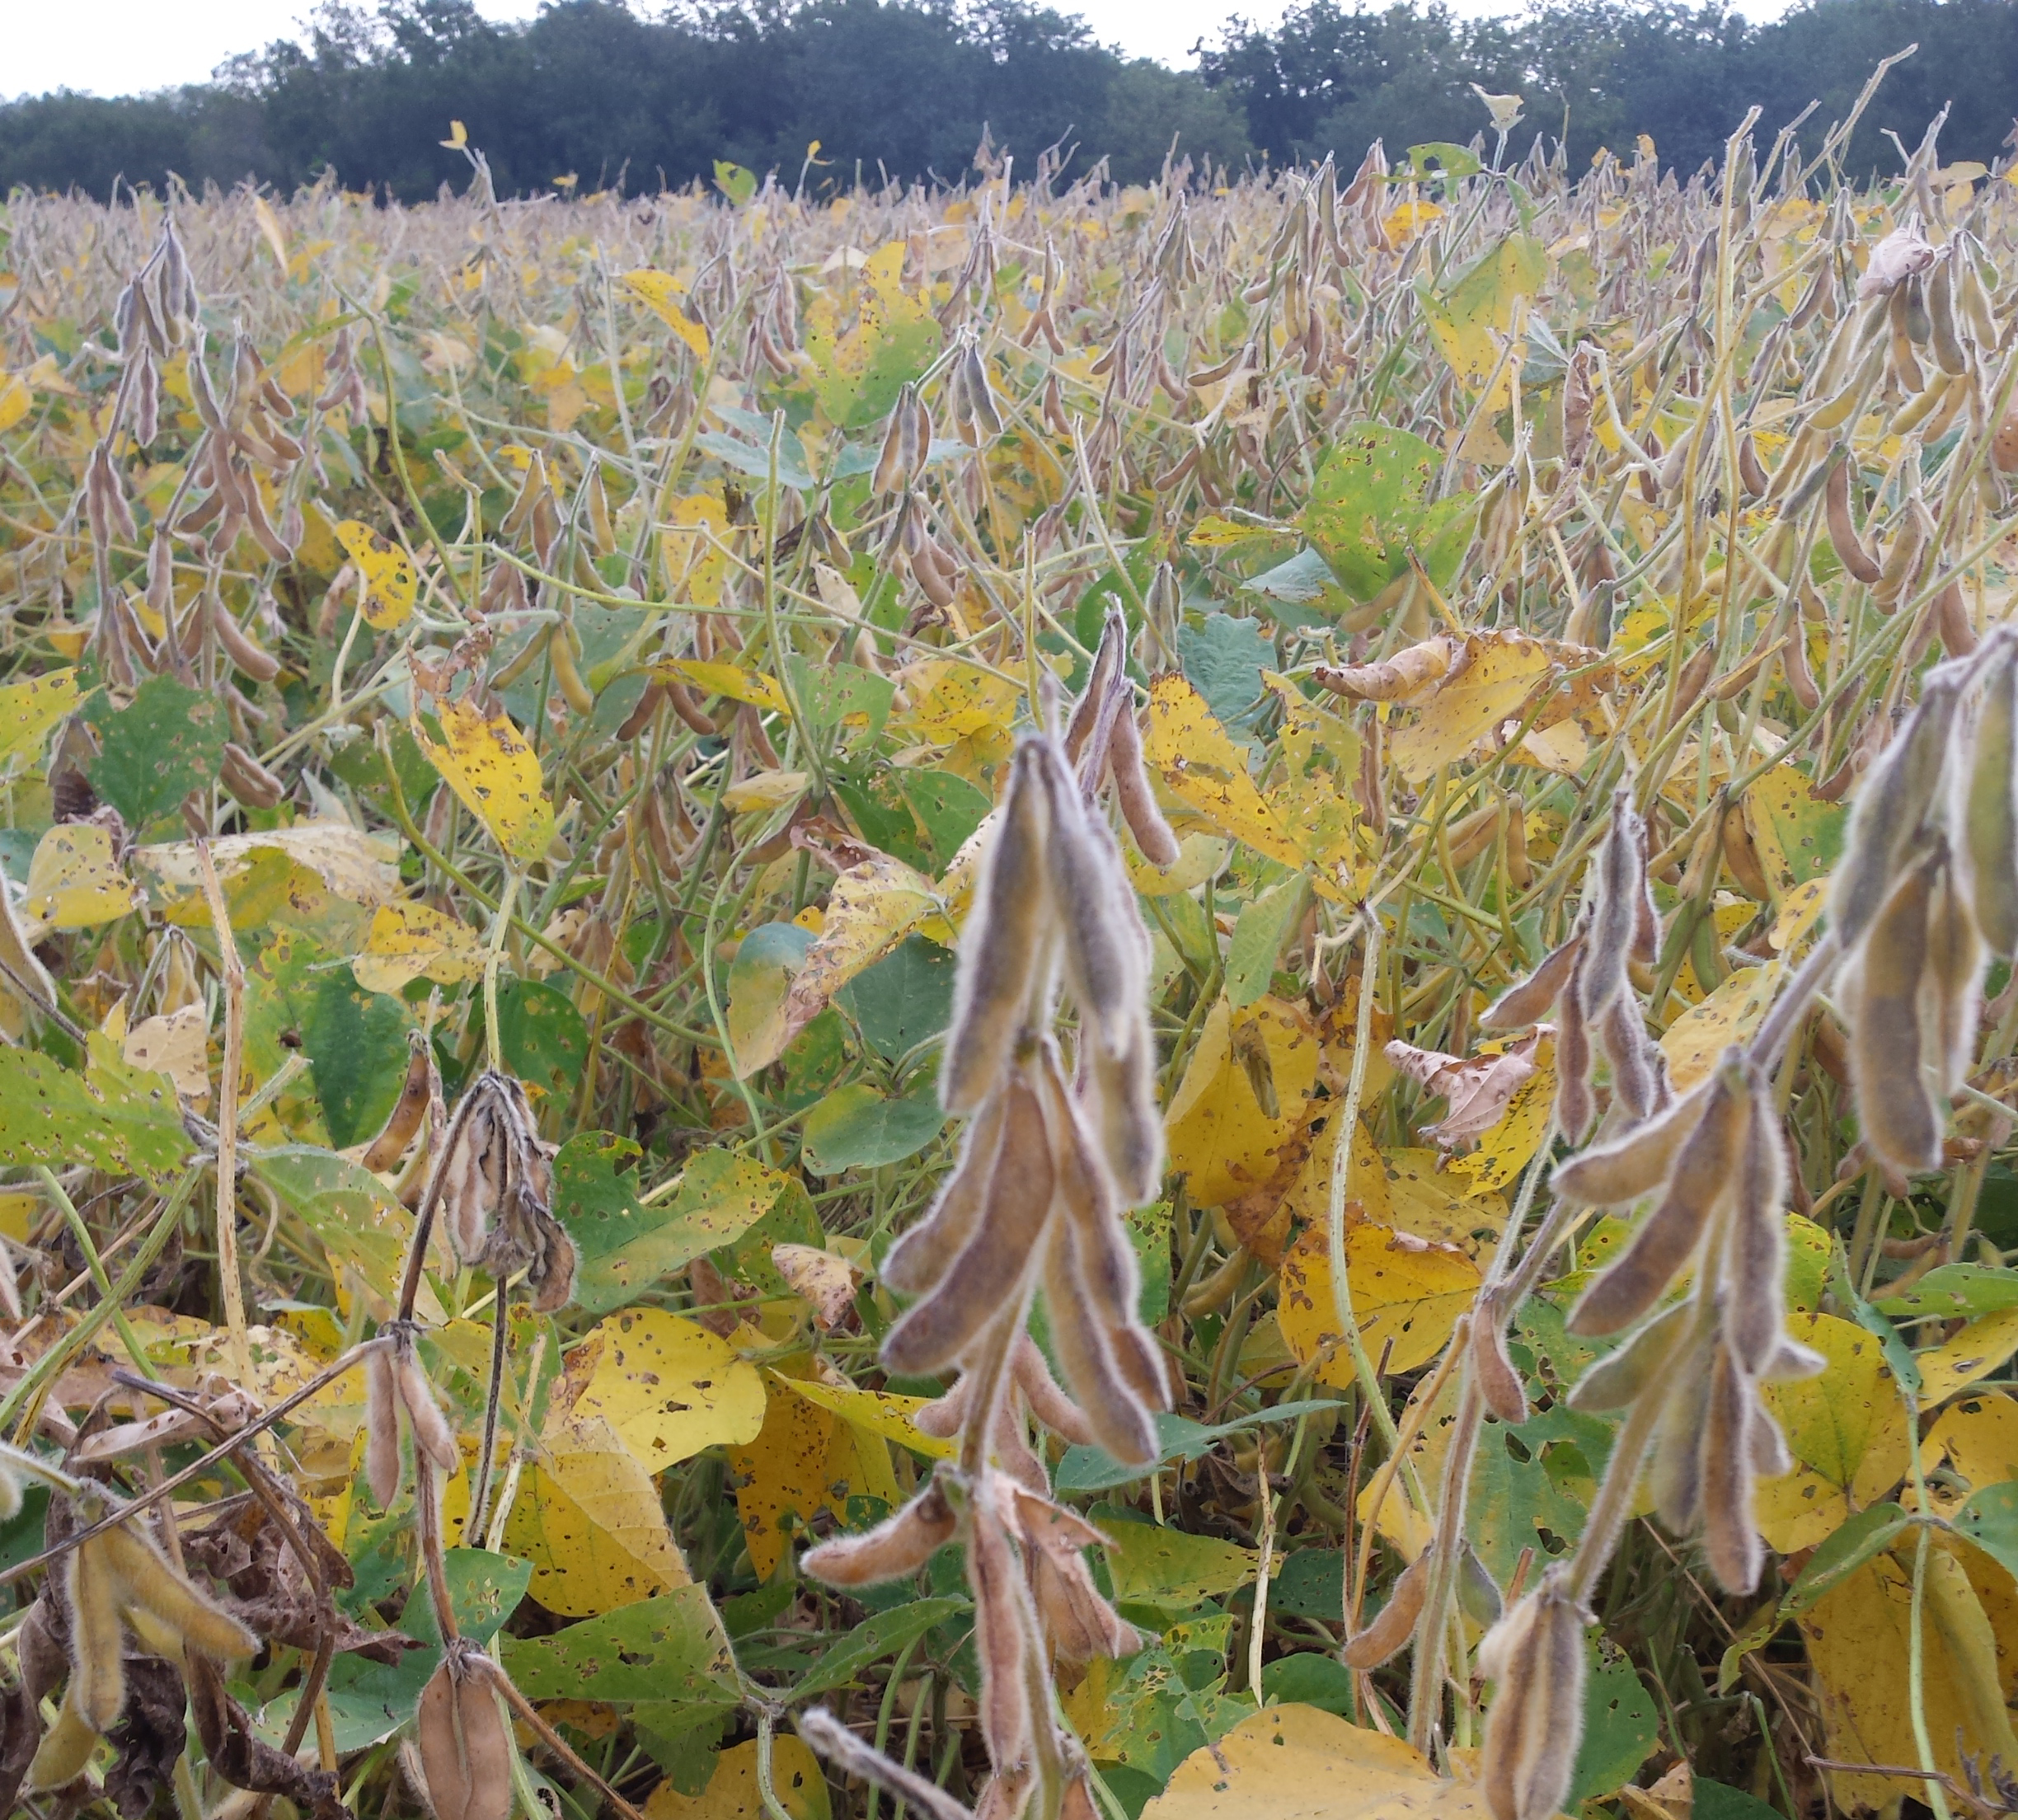 Mature soybean pods but green stems at harvest